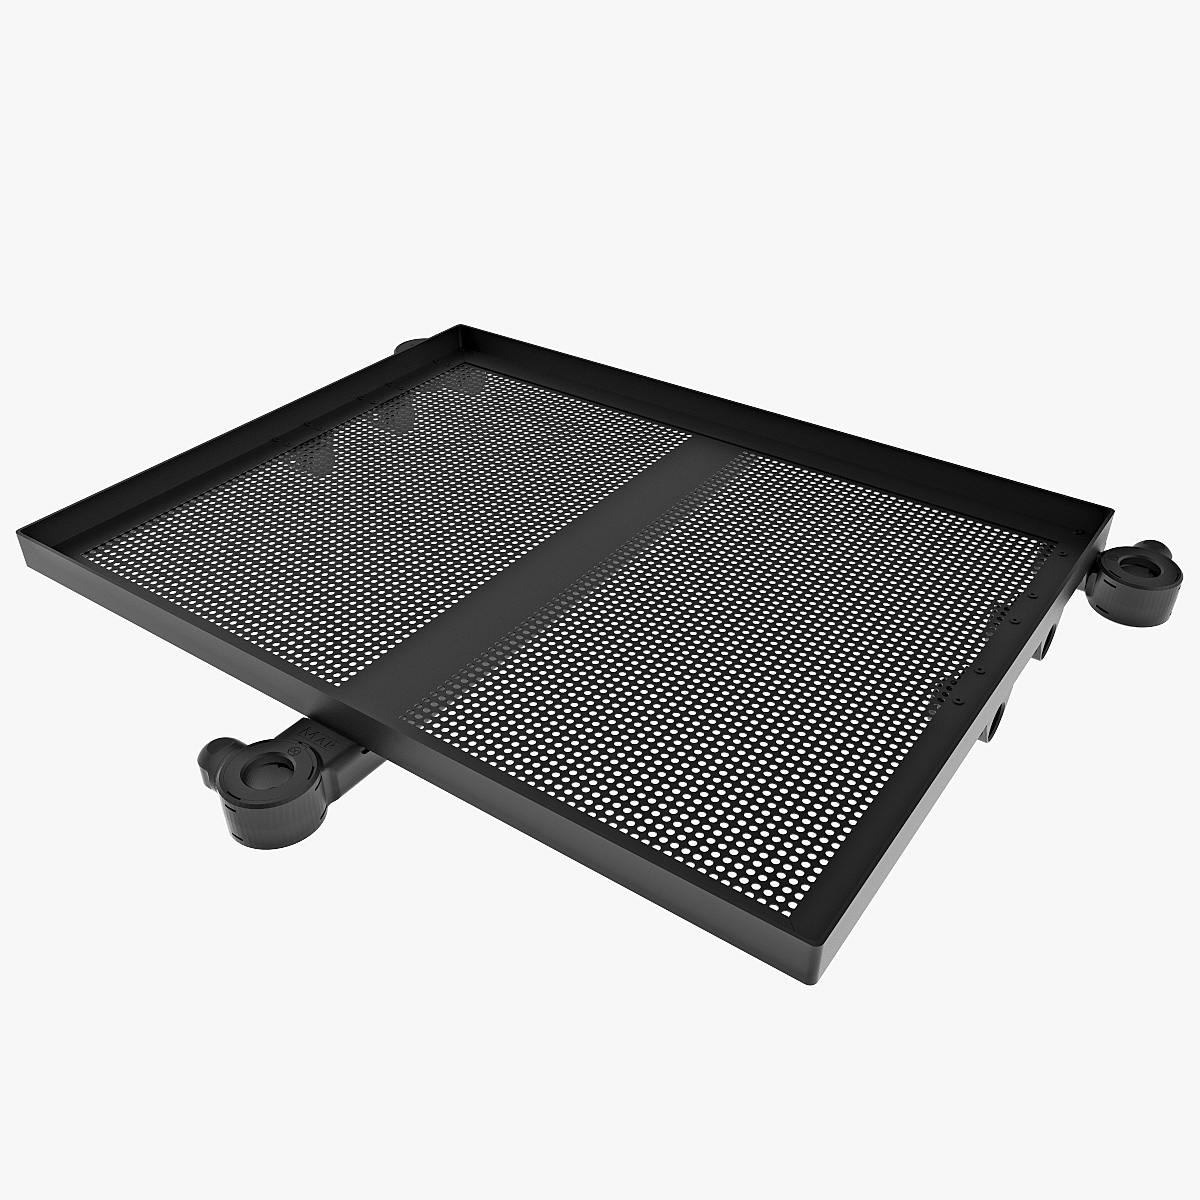 Angling side tray/ground bait bowl suitable for Octoplus legs and similar 